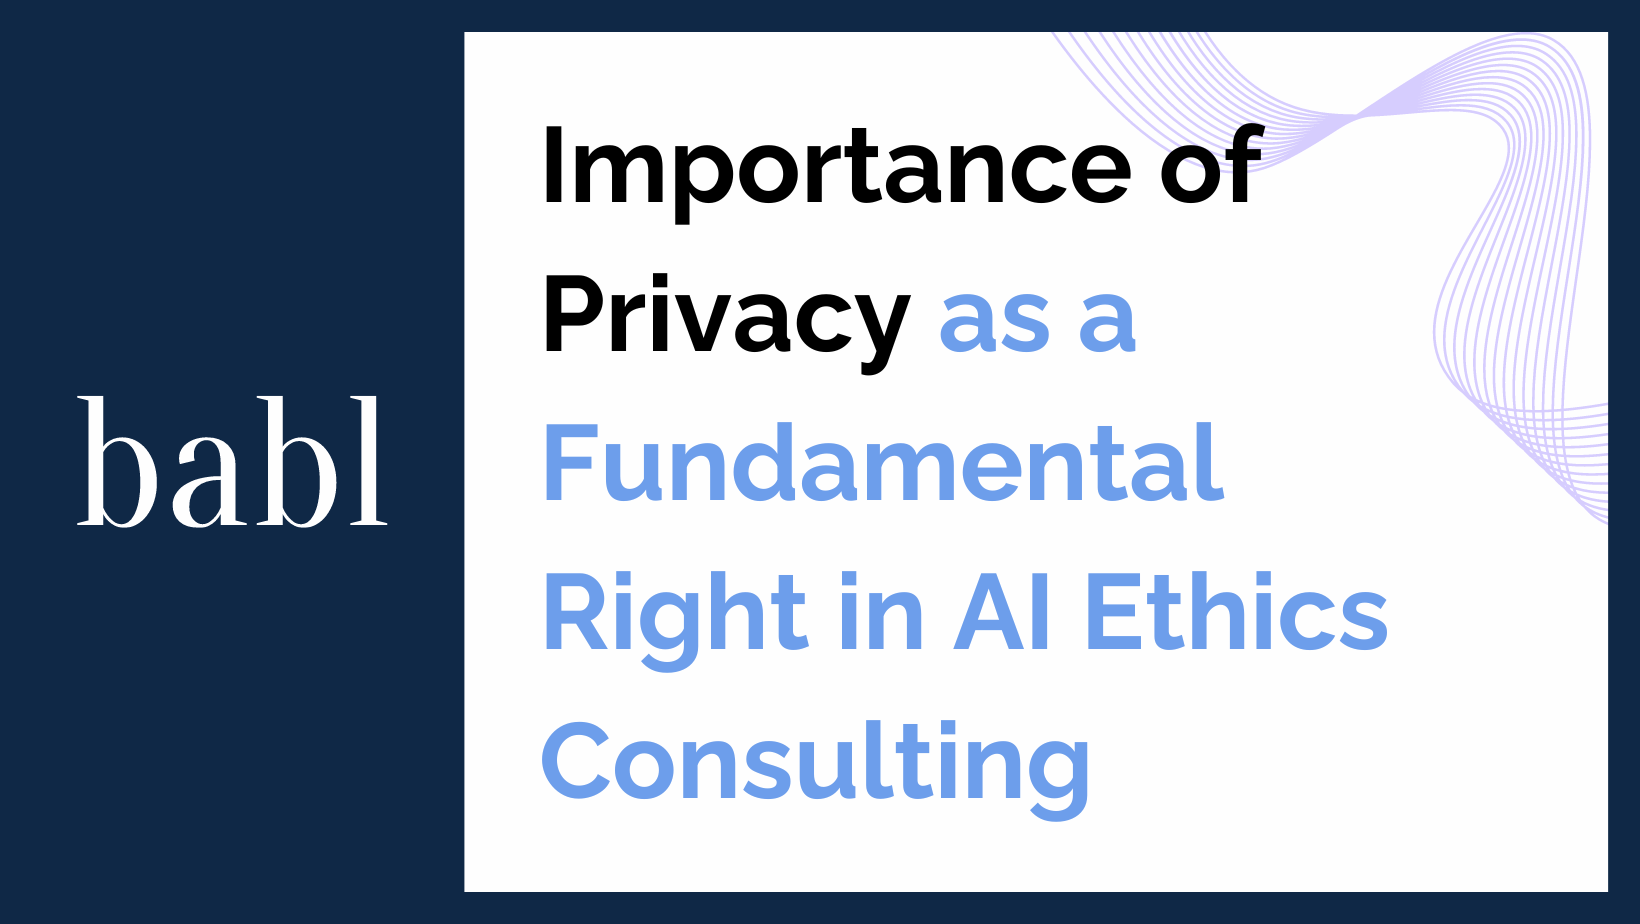 Importance of Privacy as a Fundamental Right in AI Ethics Consulting